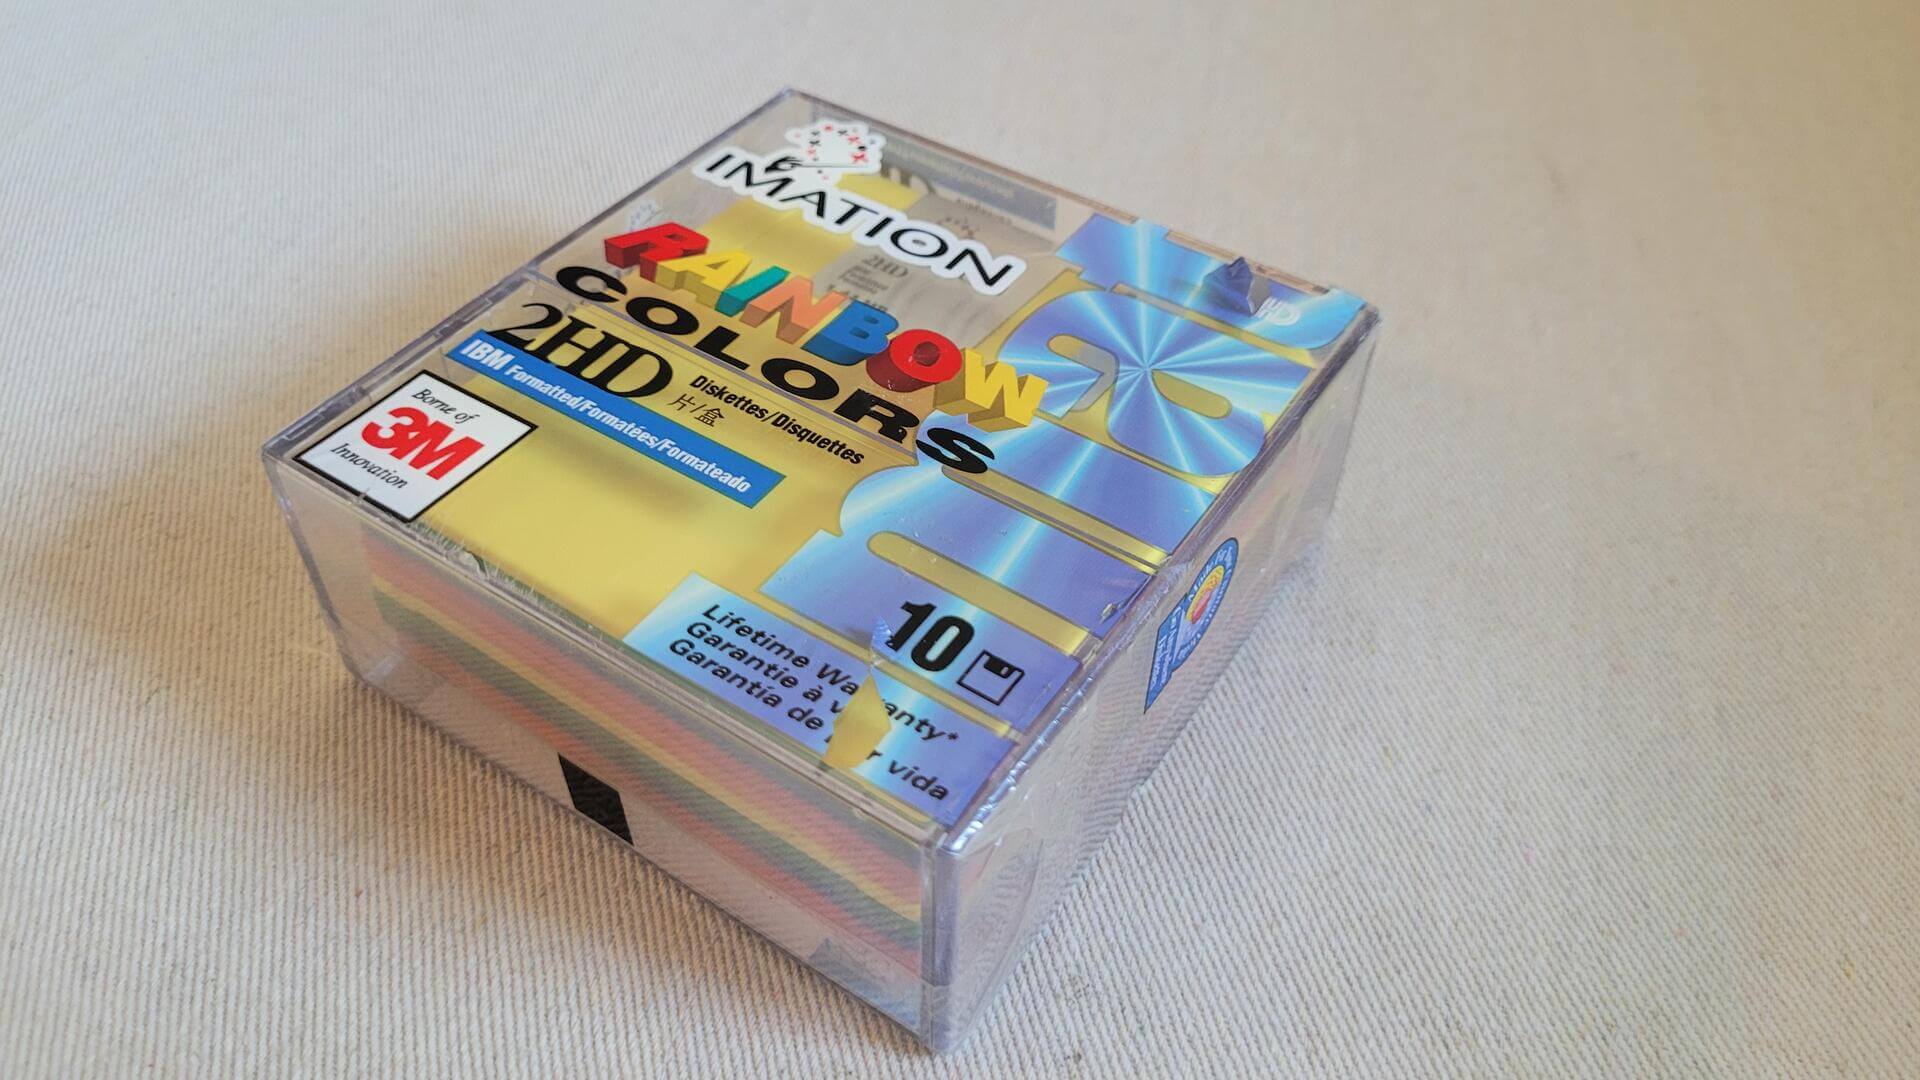 Imation IBM Formatted 2HD Diskettes 3.5" 10 pack floppy discs 1.44MB sealed box rainbow colors edition lifetime warranty